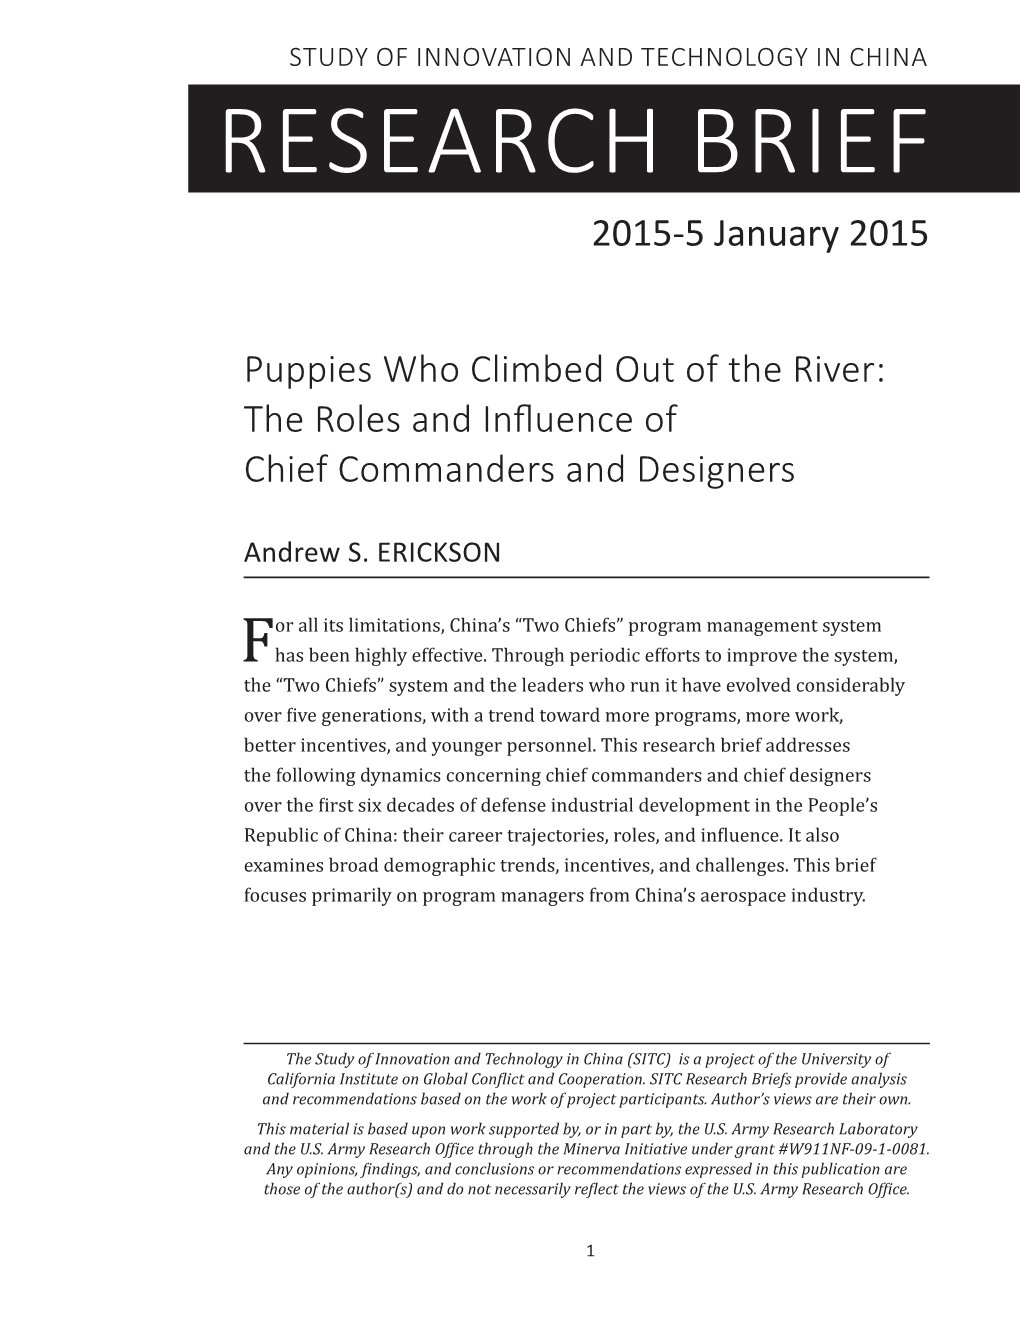 RESEARCH BRIEF 2015-5 January 2015